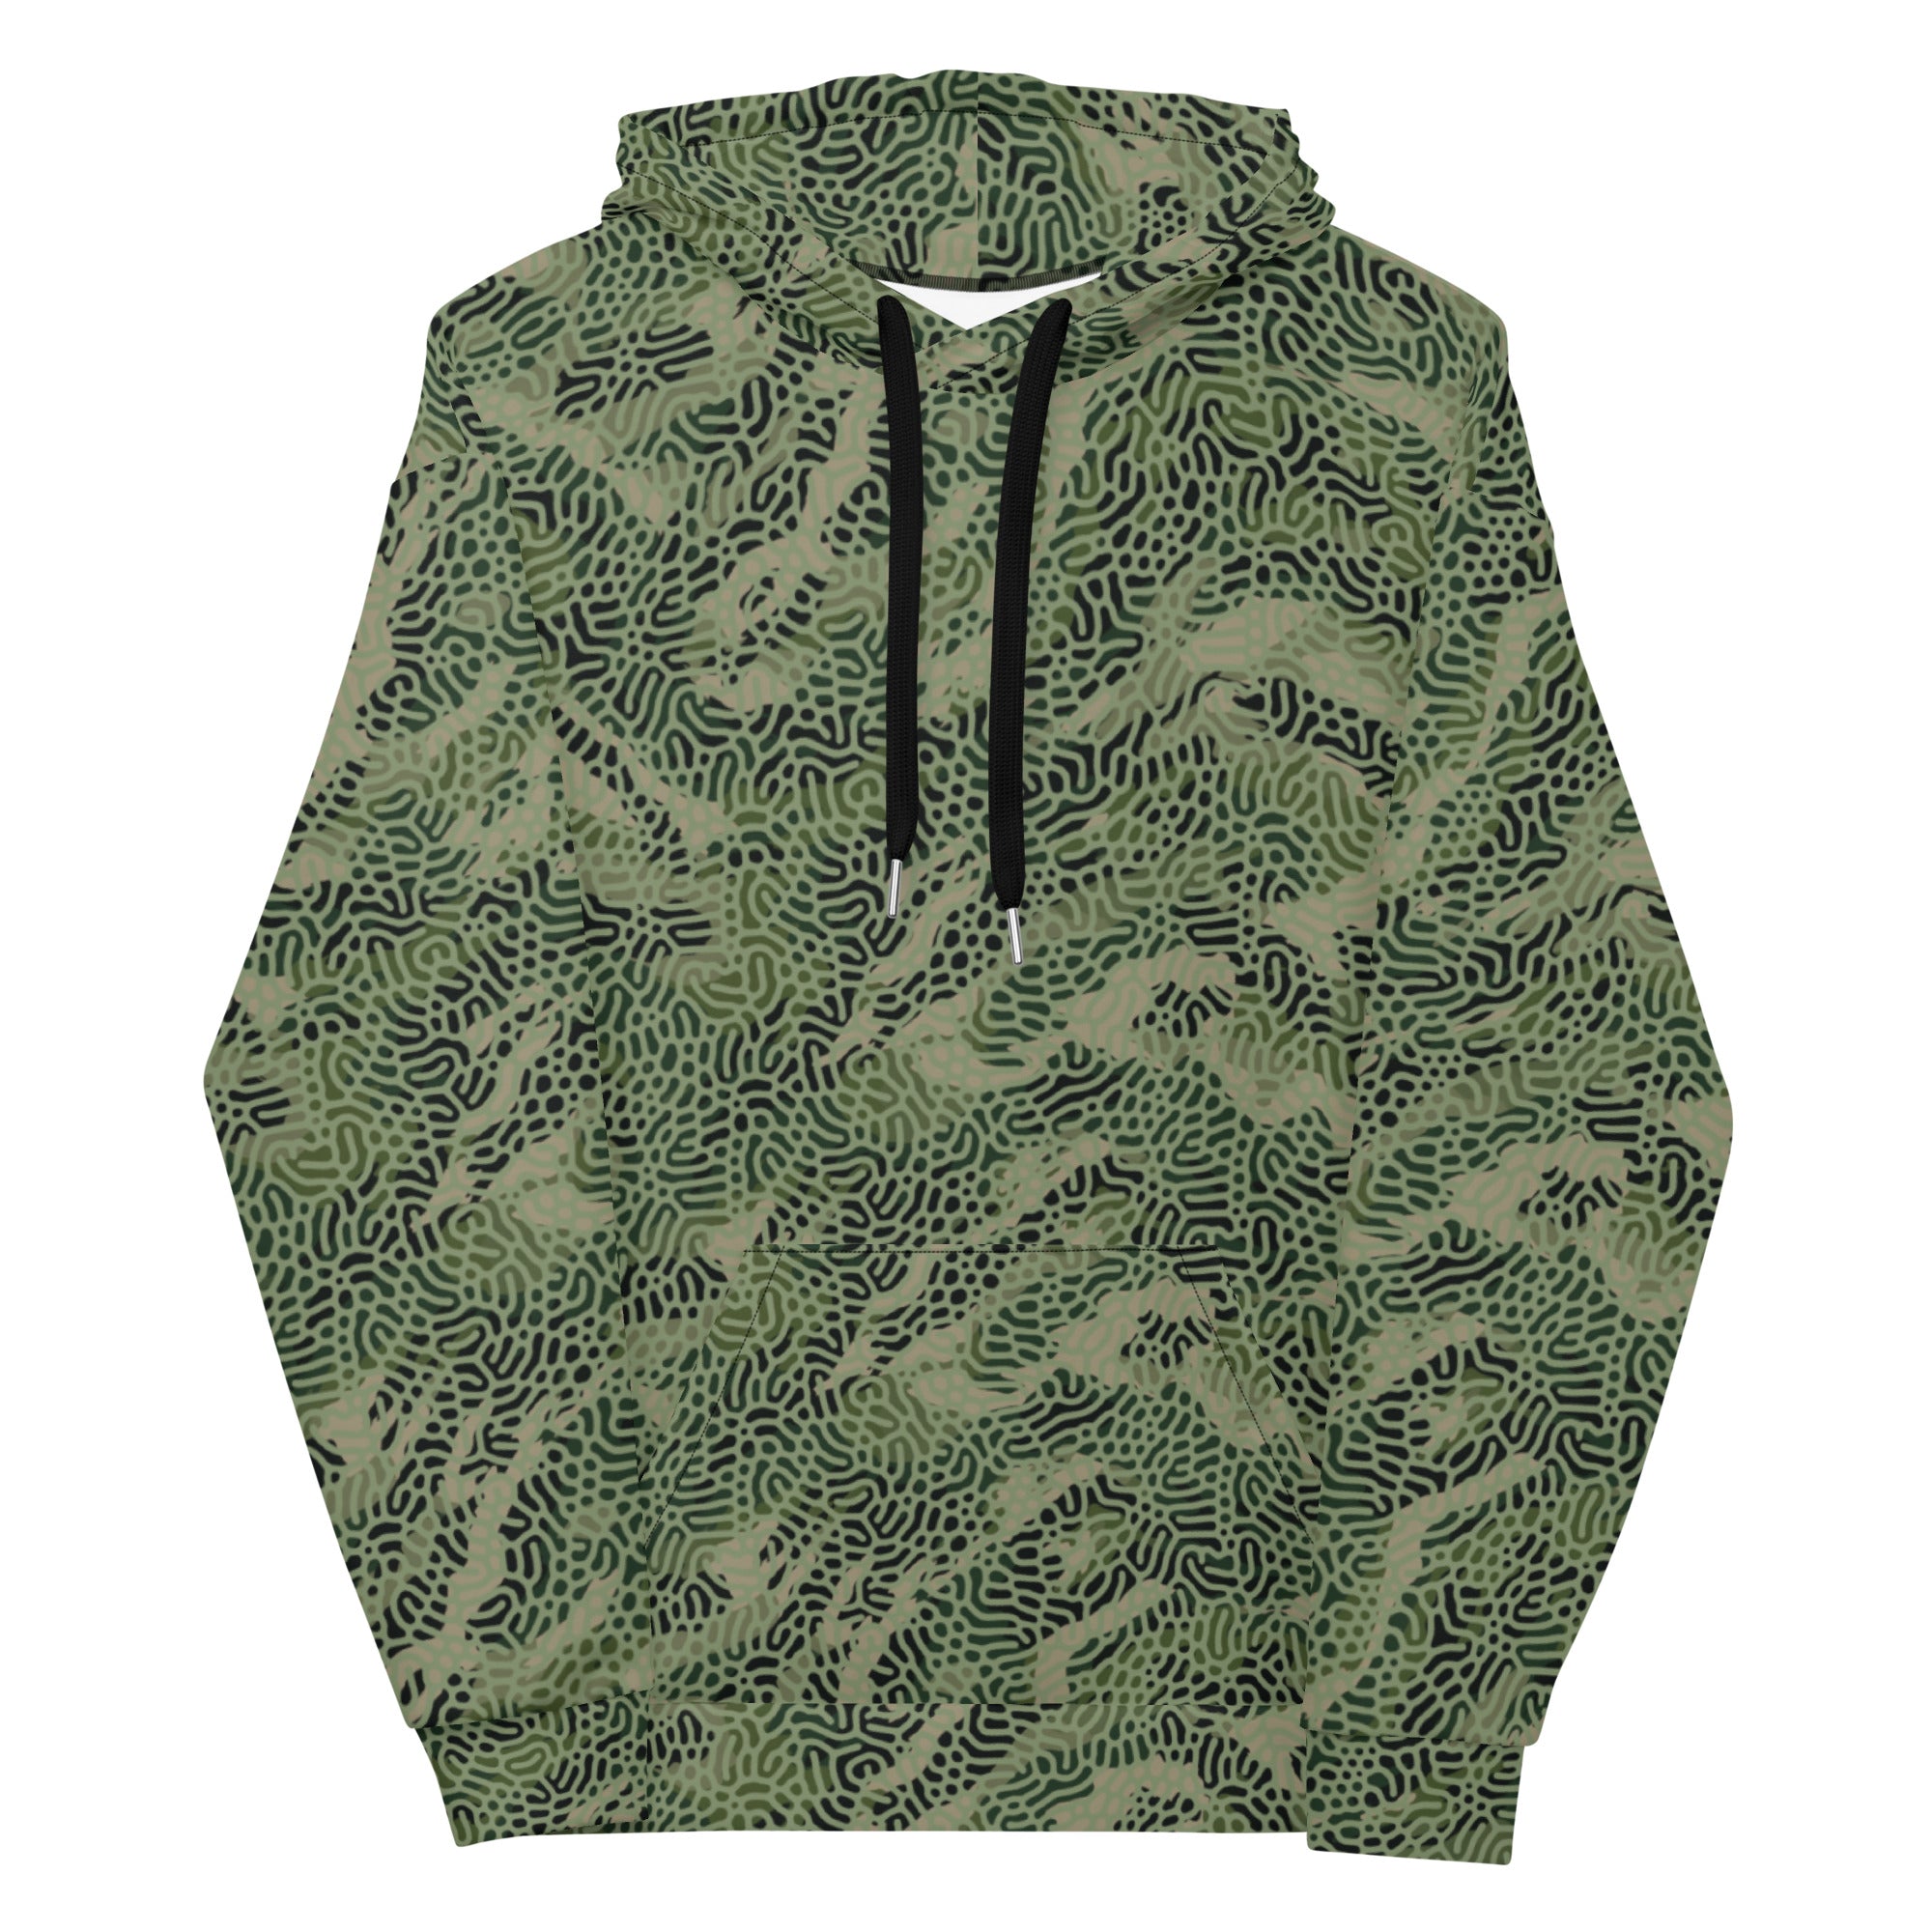 Timberline American Tiger Stripe Multidirectional Camouflage Hoodie